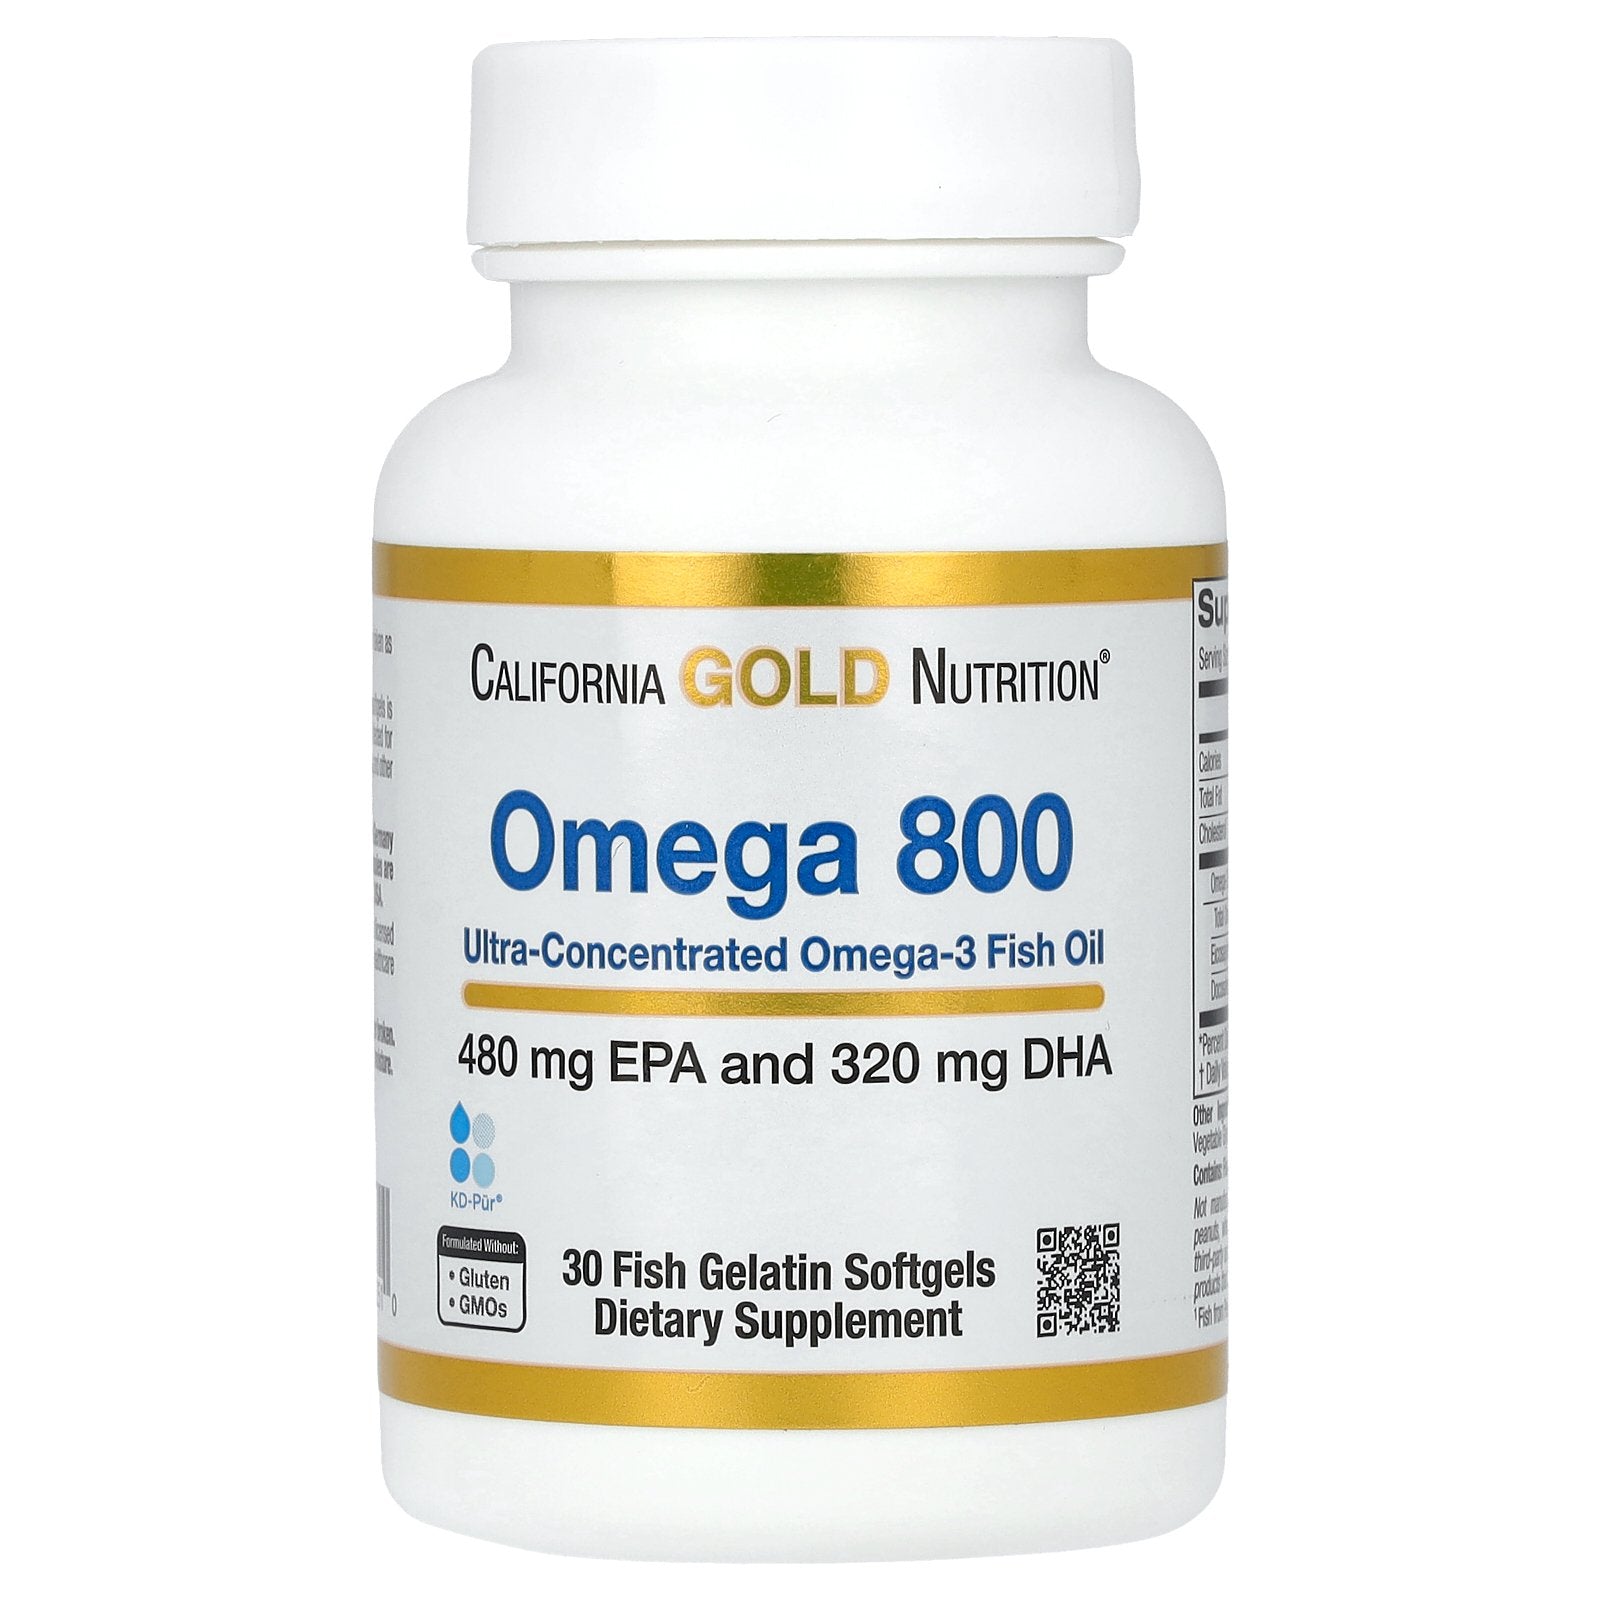 California Gold Nutrition, Omega 800 Ultra-Concentrated Omega-3 Fish Oil, kd-pur Triglyceride Form, 1,000 mg, 30 Fish Gelatin Softgels